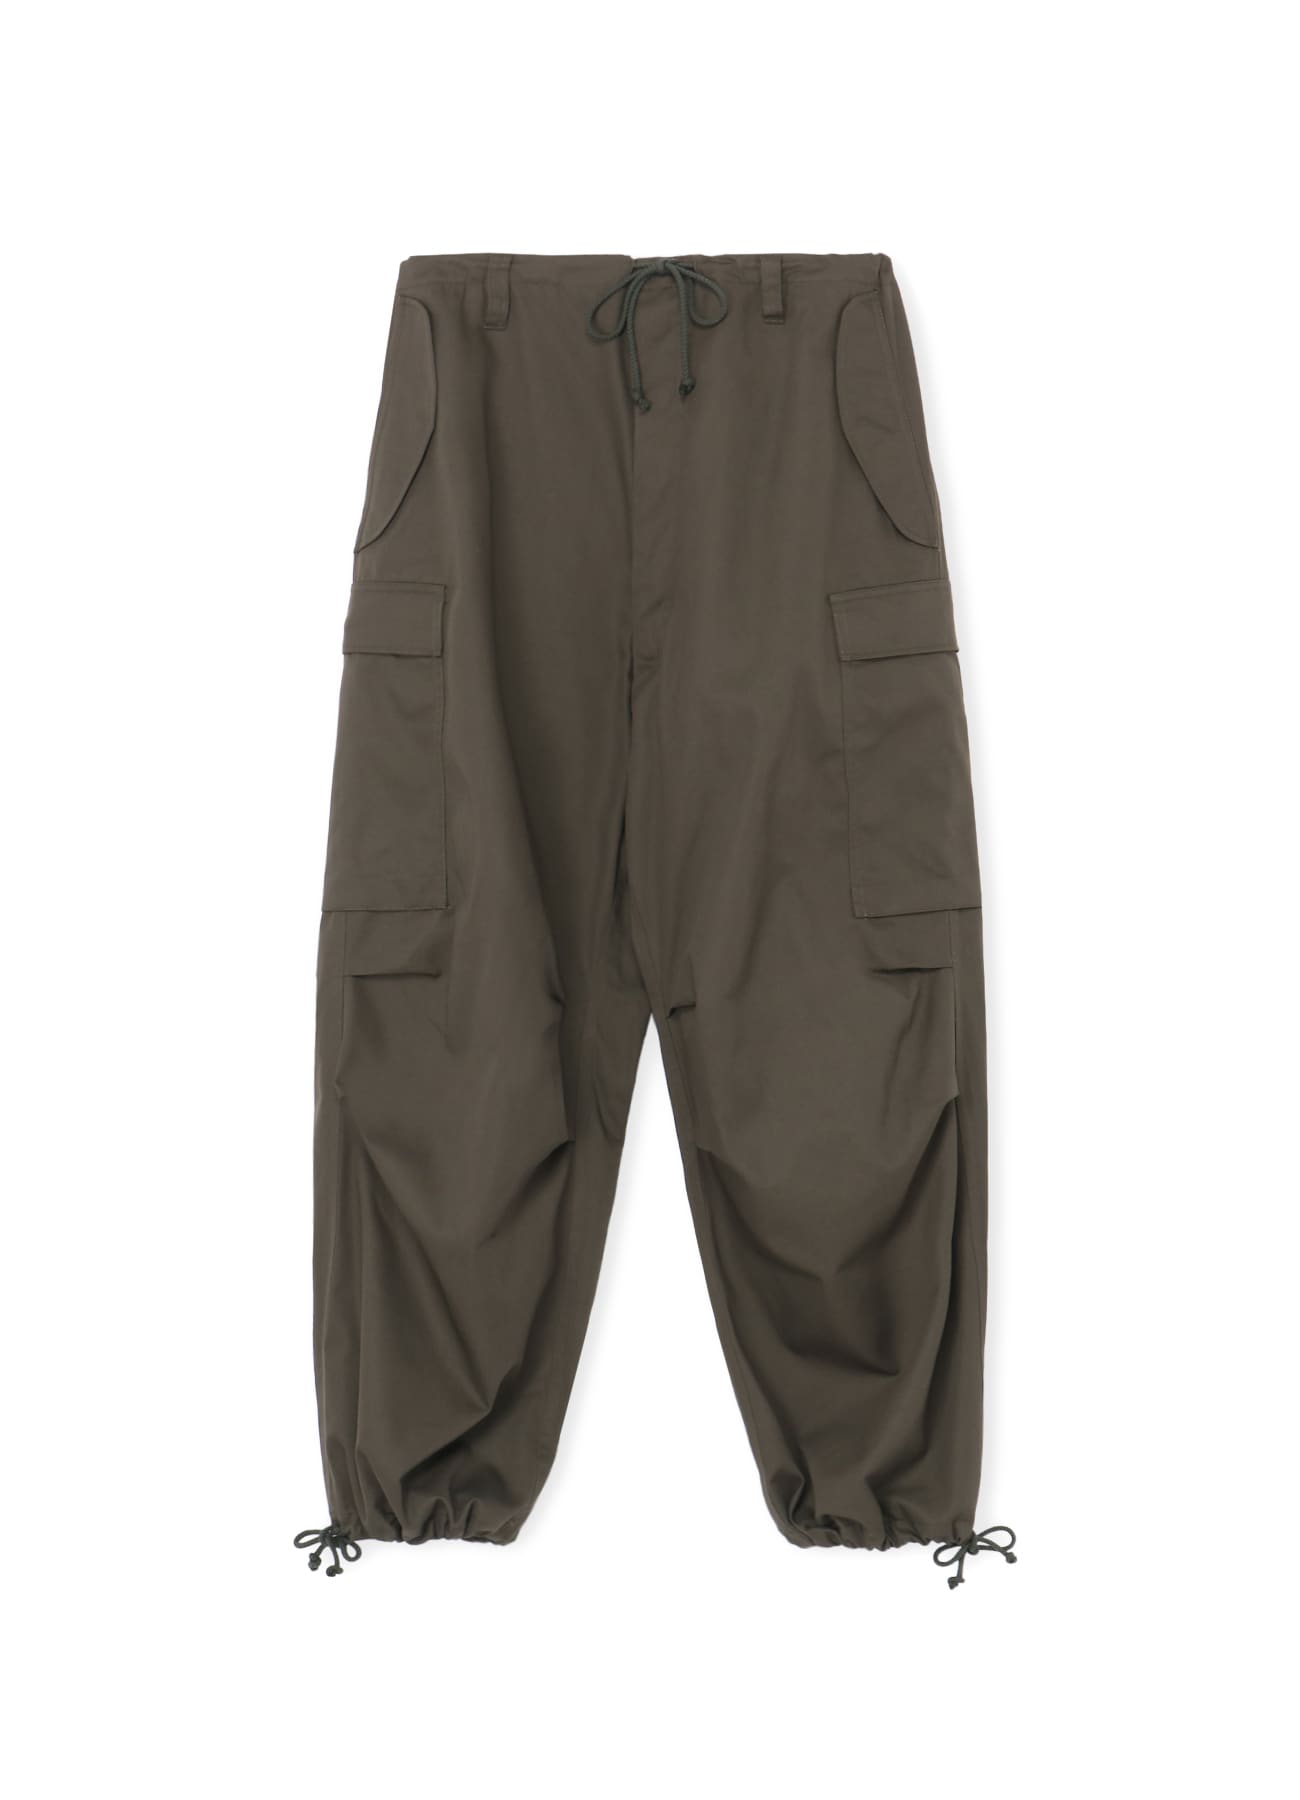 POLYESTER/COTTON TWILL CARGO PANTS(S KHAKI): Y's for men｜WILDSIDE ...